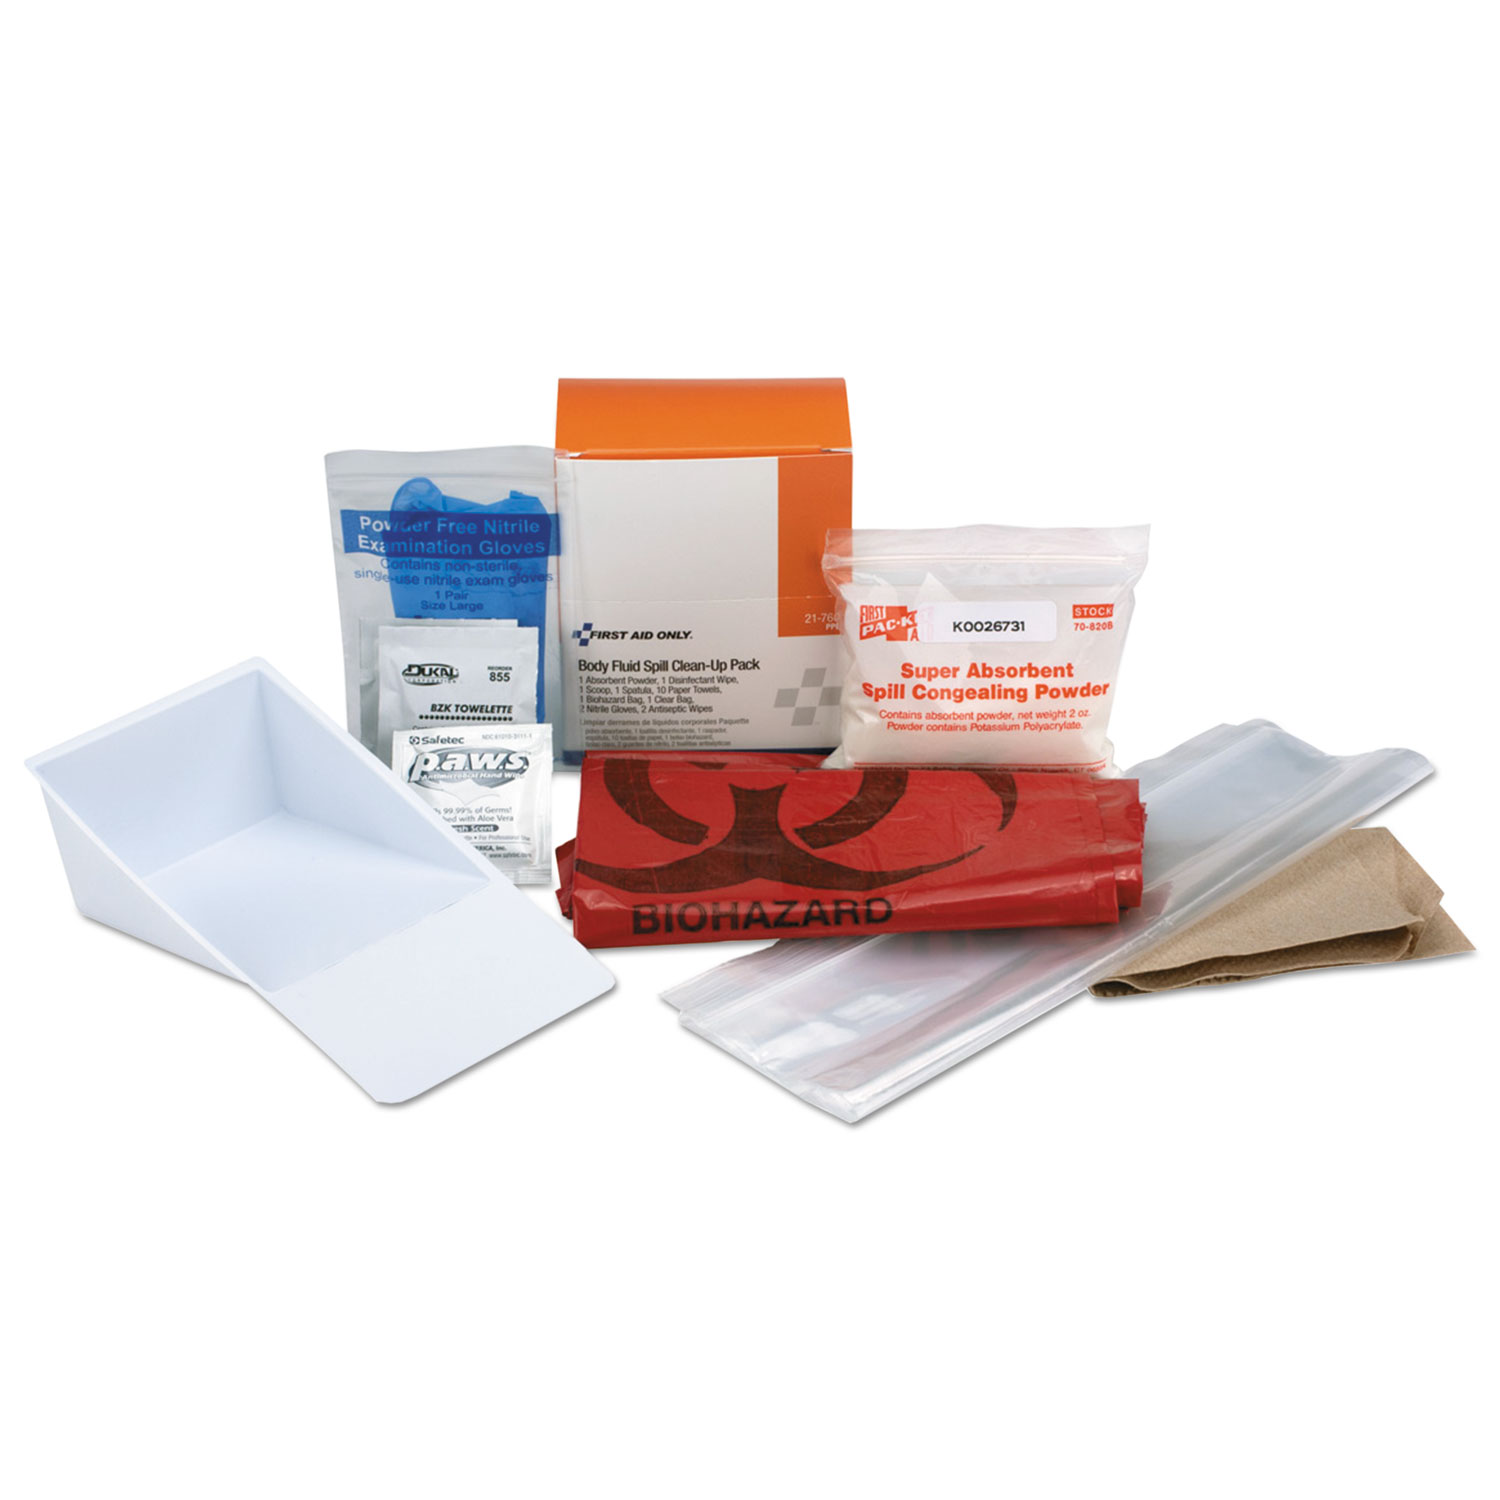 BBP Spill Cleanup Kit, 3.625" x 4.312" x 2.25"